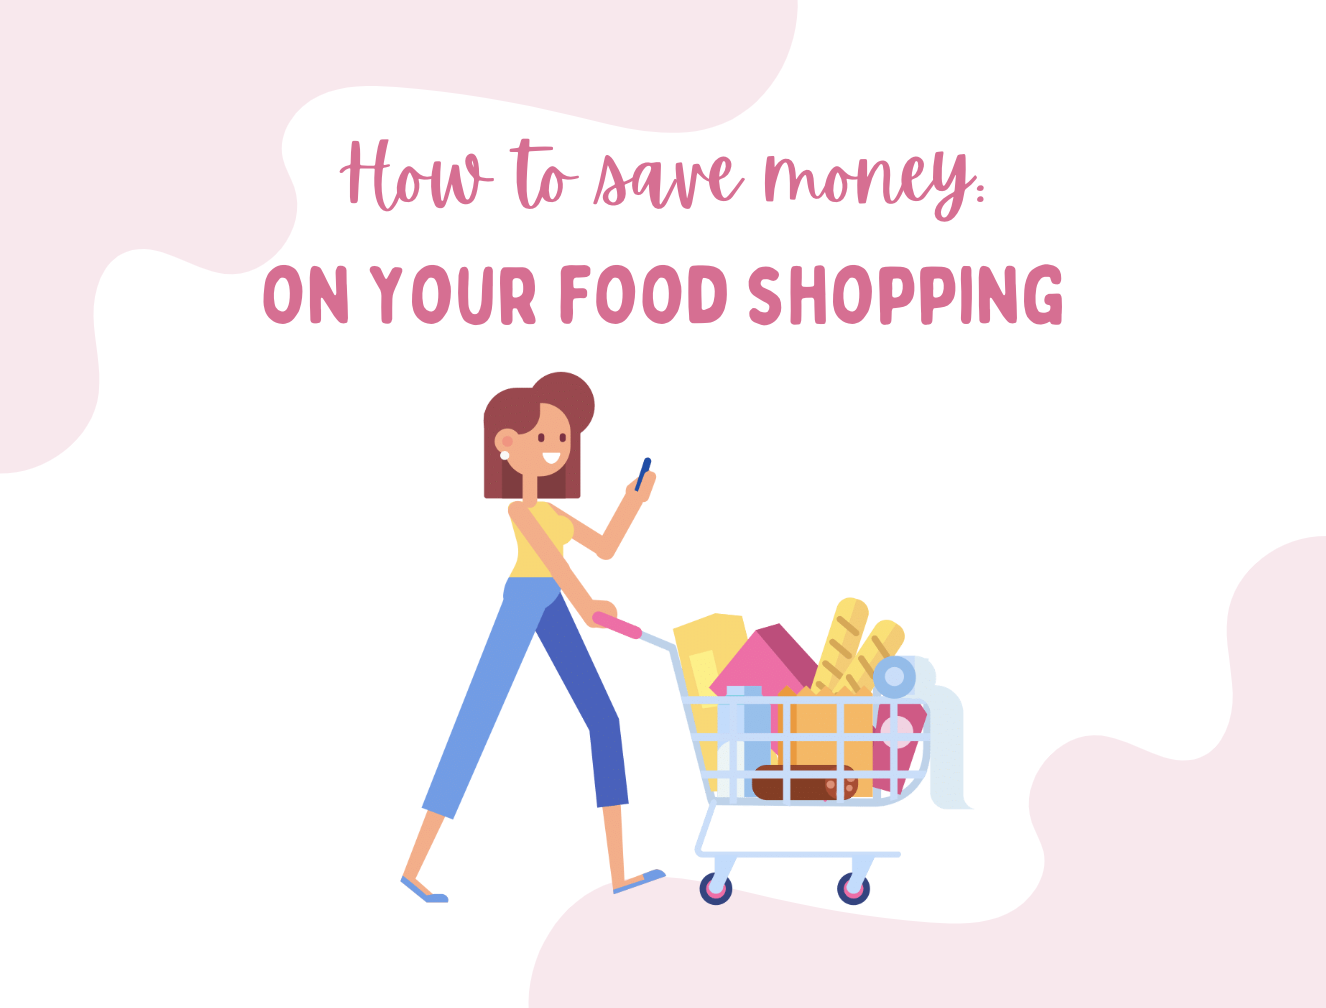 frugal mum shopping tips, how to save money on food shopping, groceries, weekly shop, small budget, title image for article